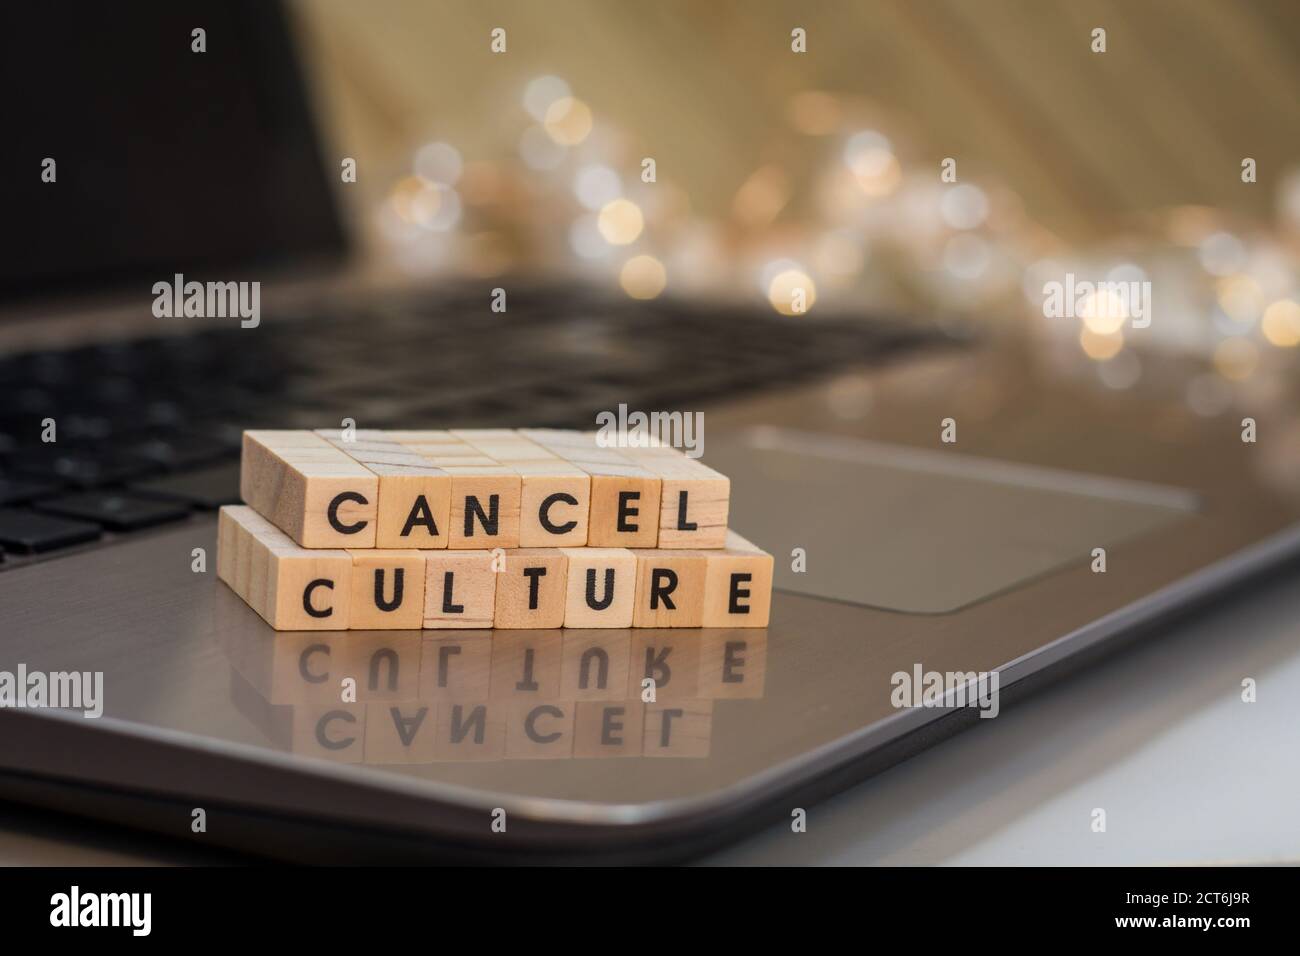 CANCEL CULTURE letter blocks concept on laptop keyboard Stock Photo